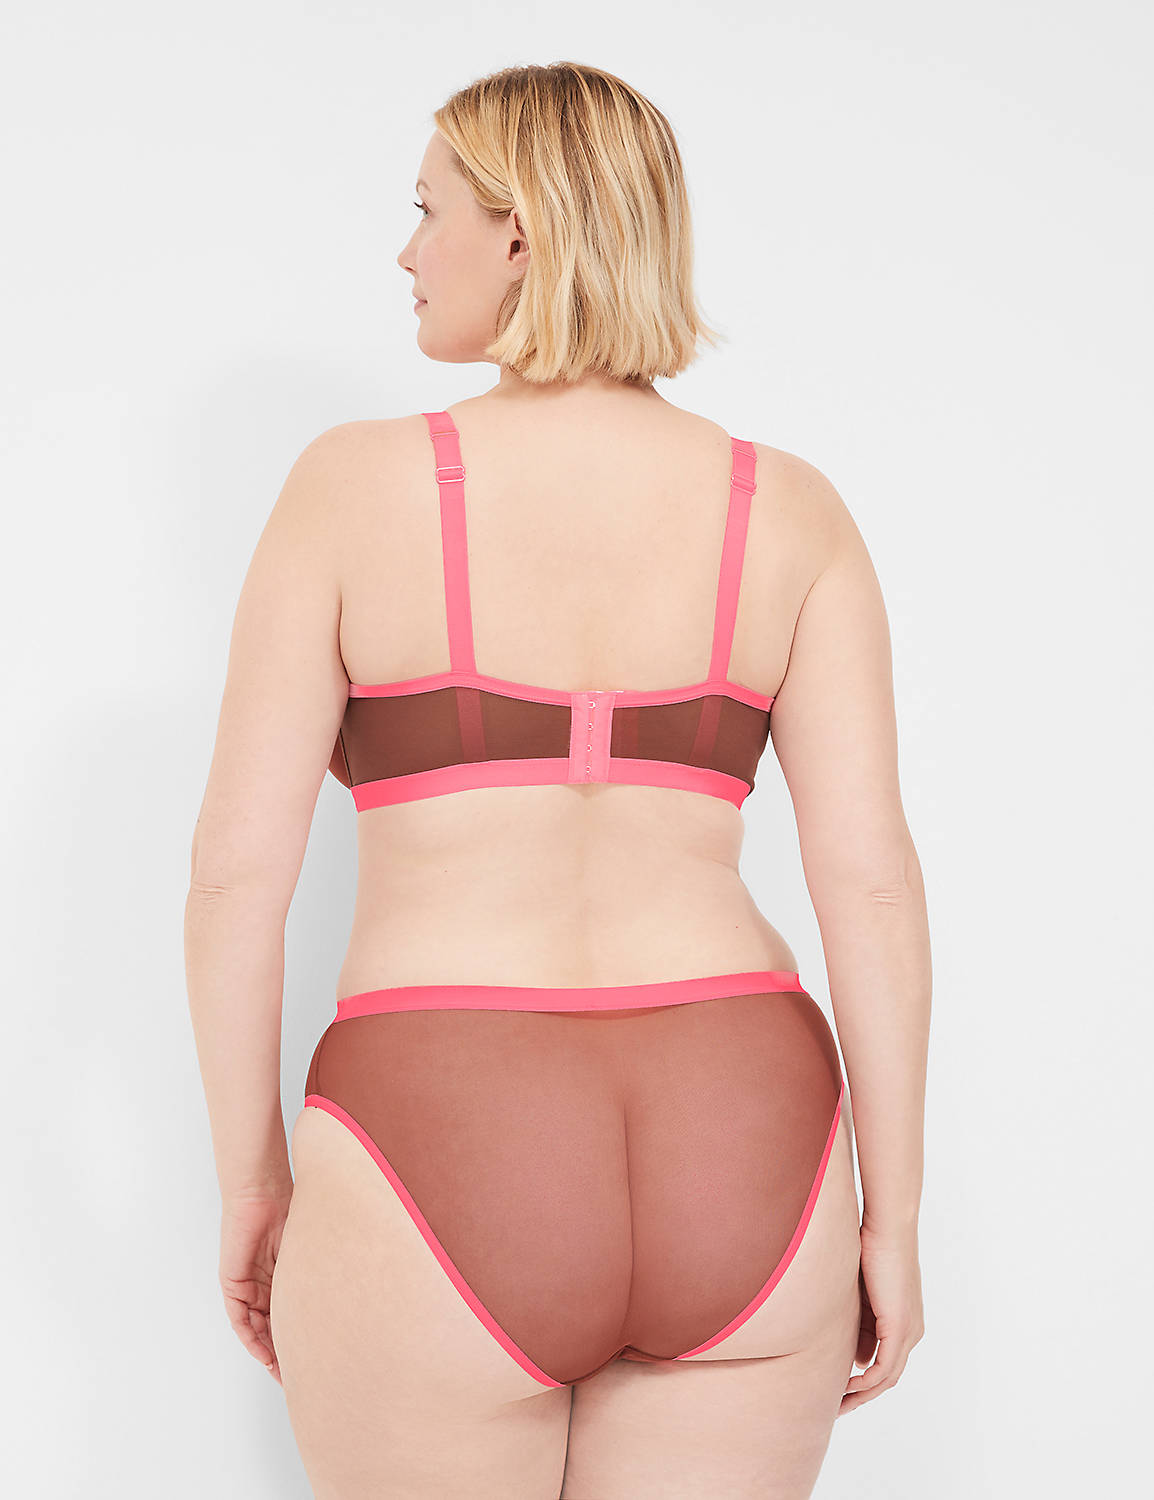 Mesh Unlined Demi 1140045 S Product Image 2